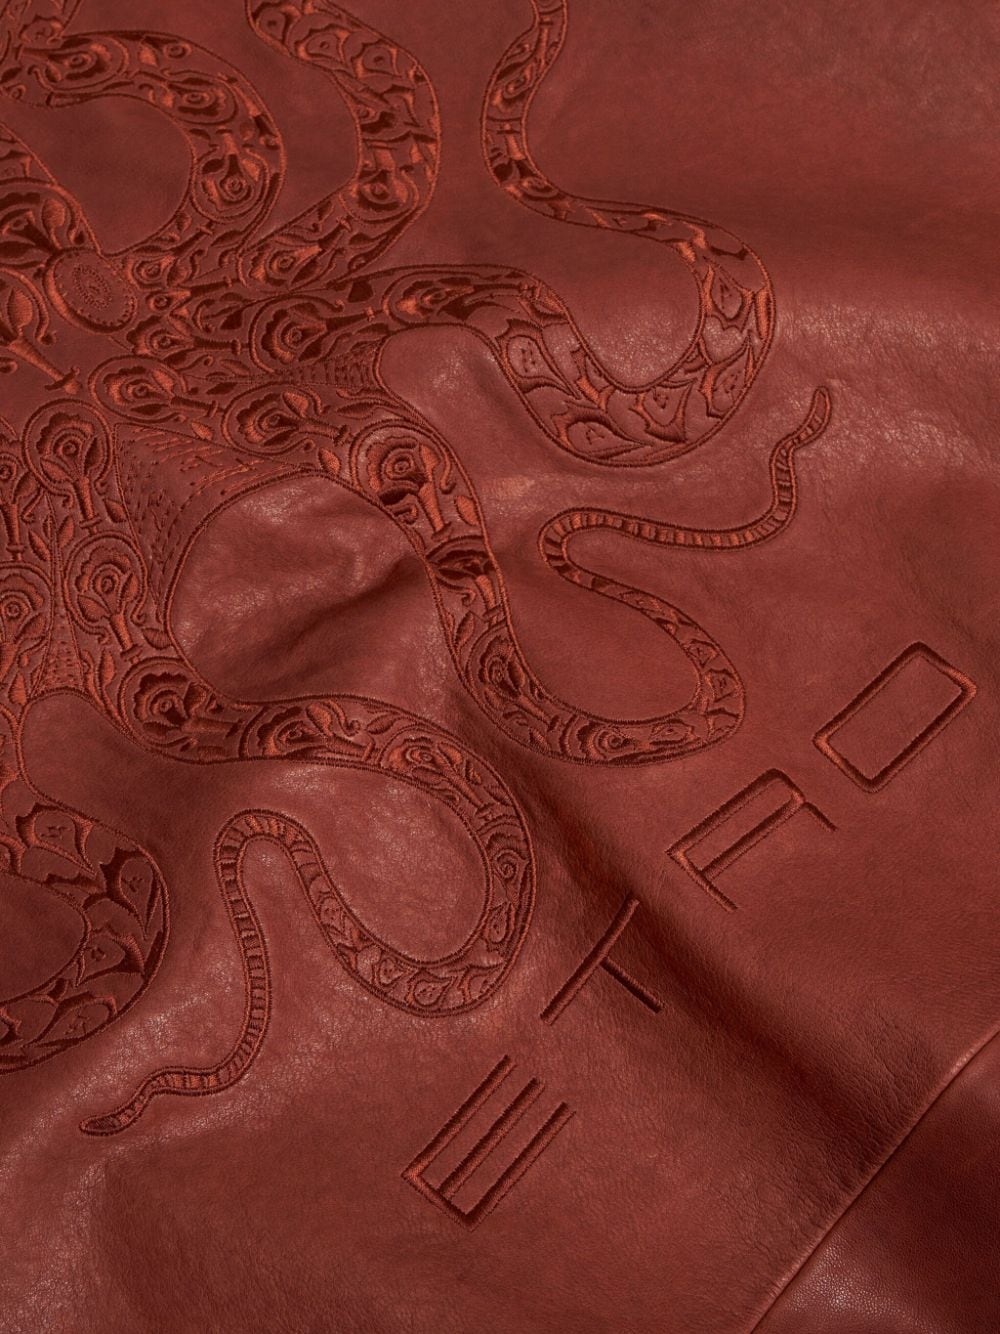 octopus-embroidered leather waist coat - 6